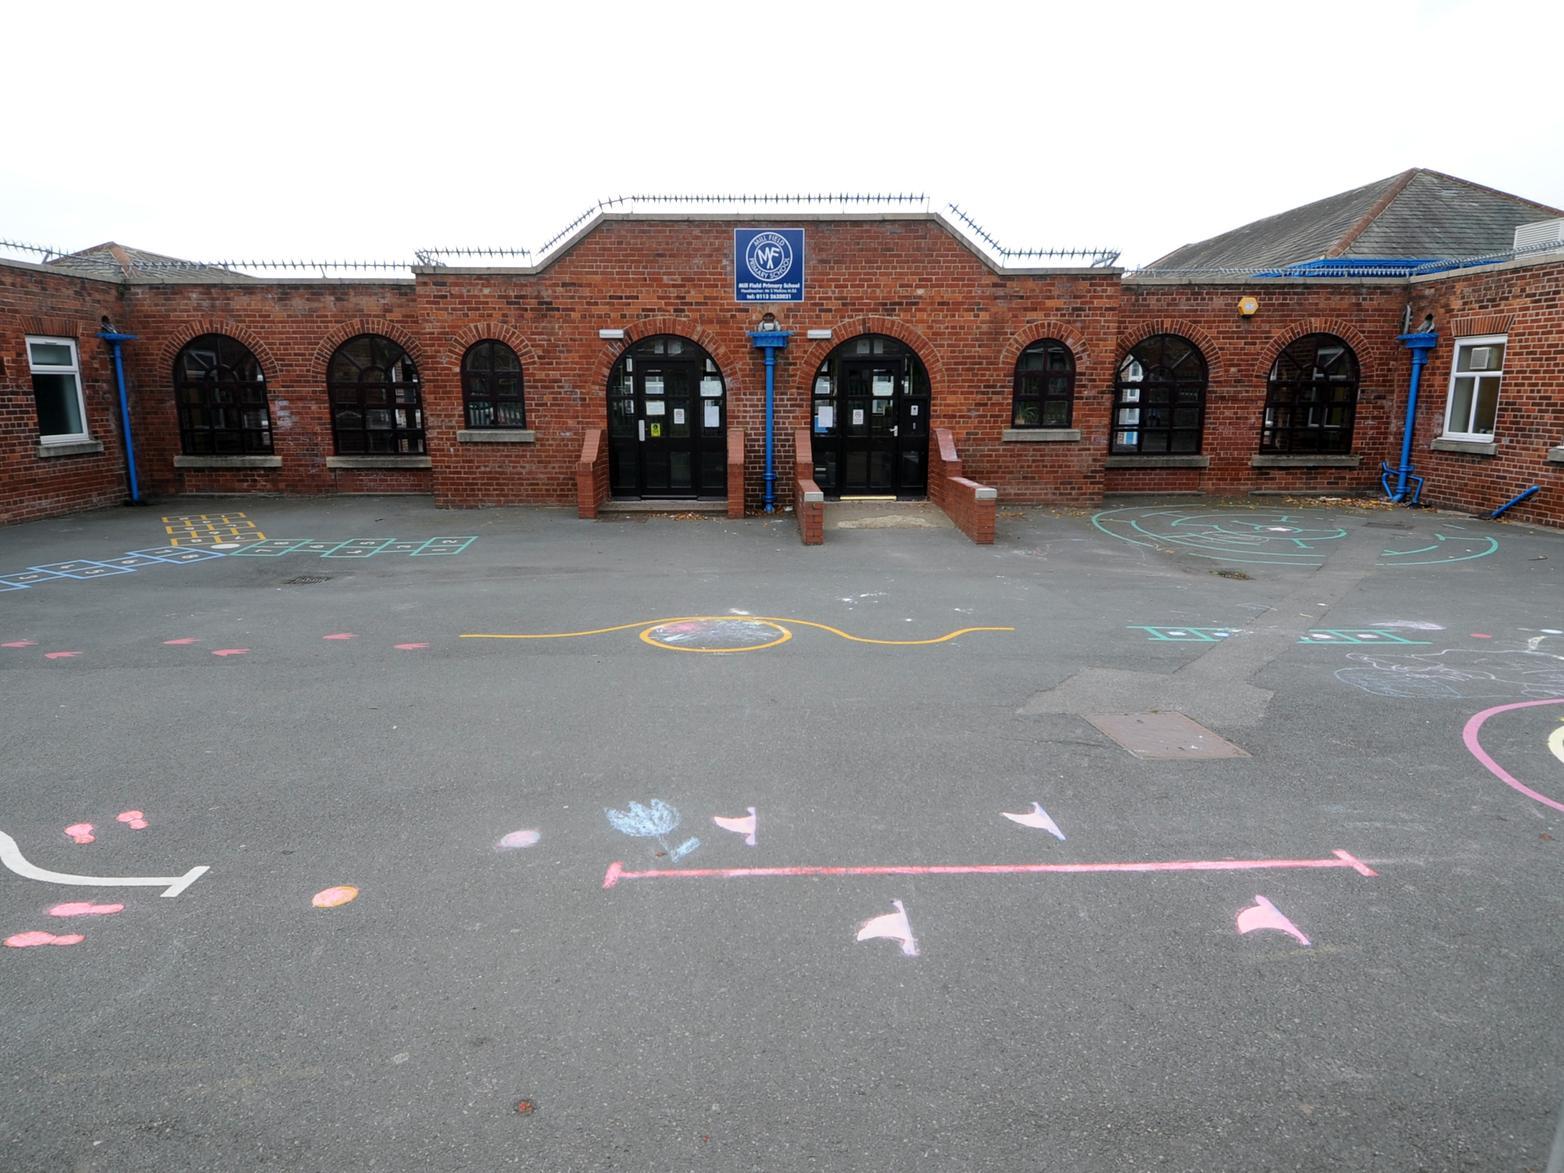 37 per cent of students at Mill Field Primary School met their expected standard